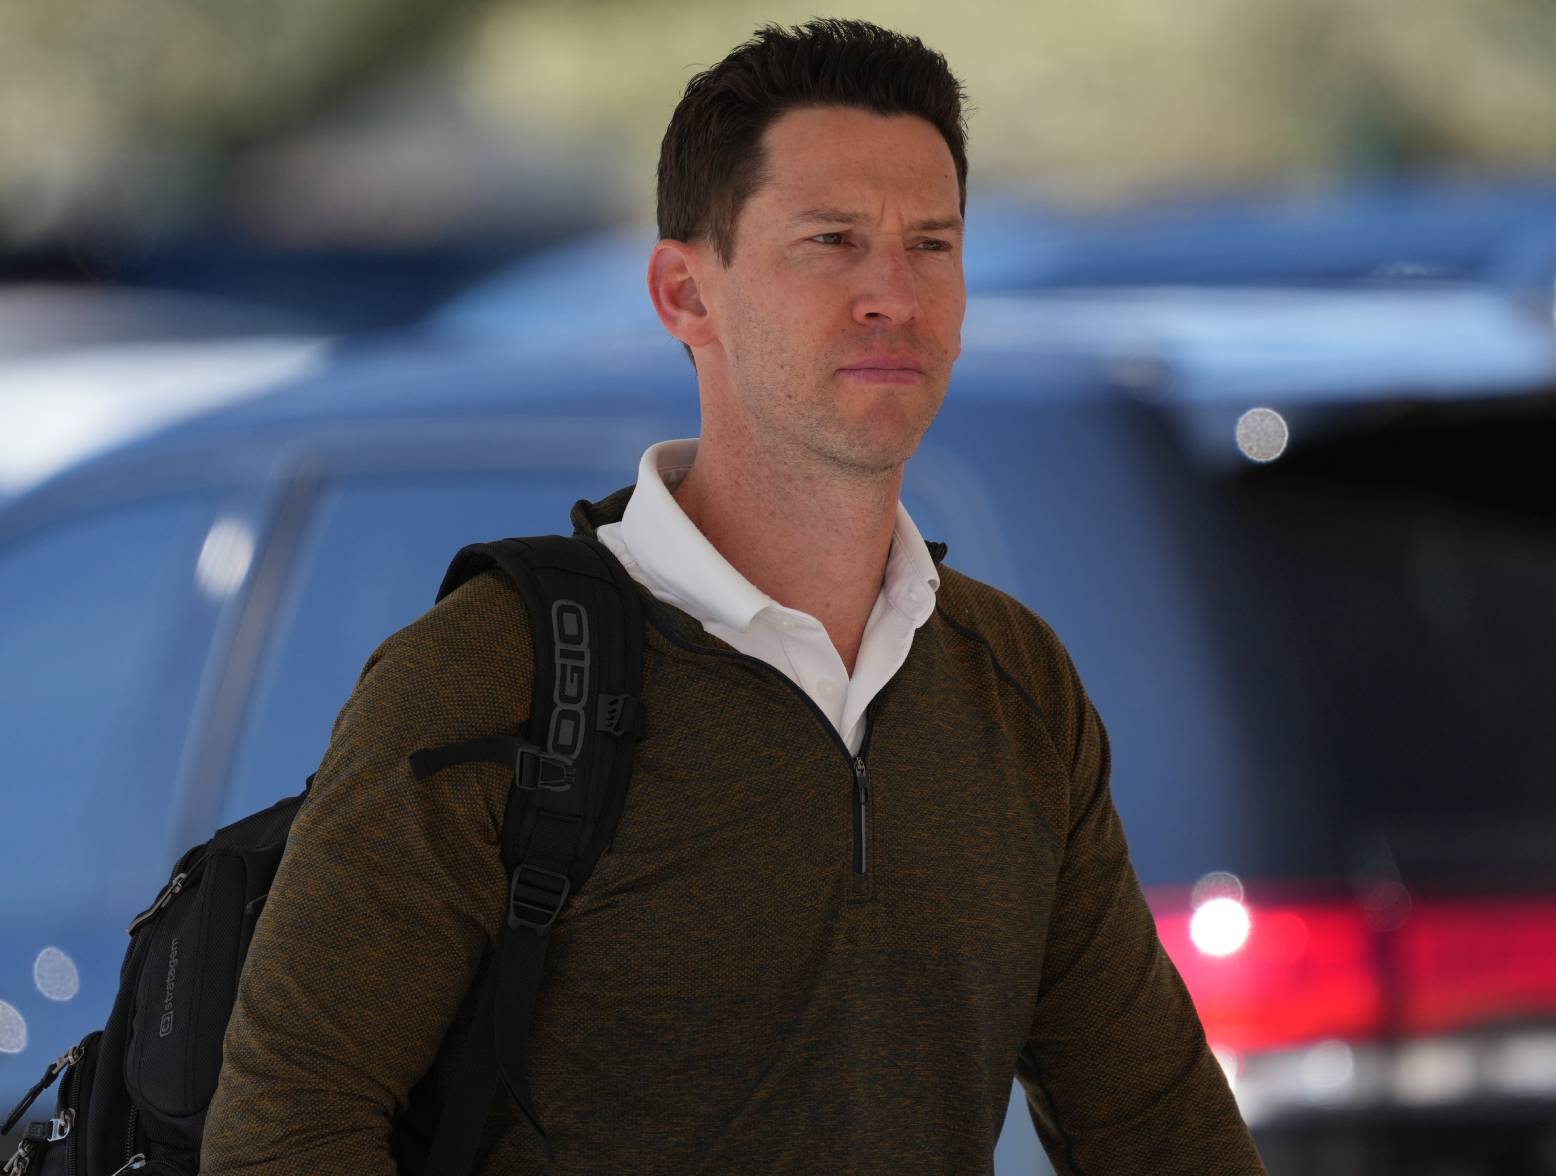 Mar 12, 2022; Mesa, AZ, USA; Chicago Cubs assistant general manager Craig Breslow arrives during a spring training workout at Sloan Park. Credit: Joe Camporeale-USA TODAY Sports